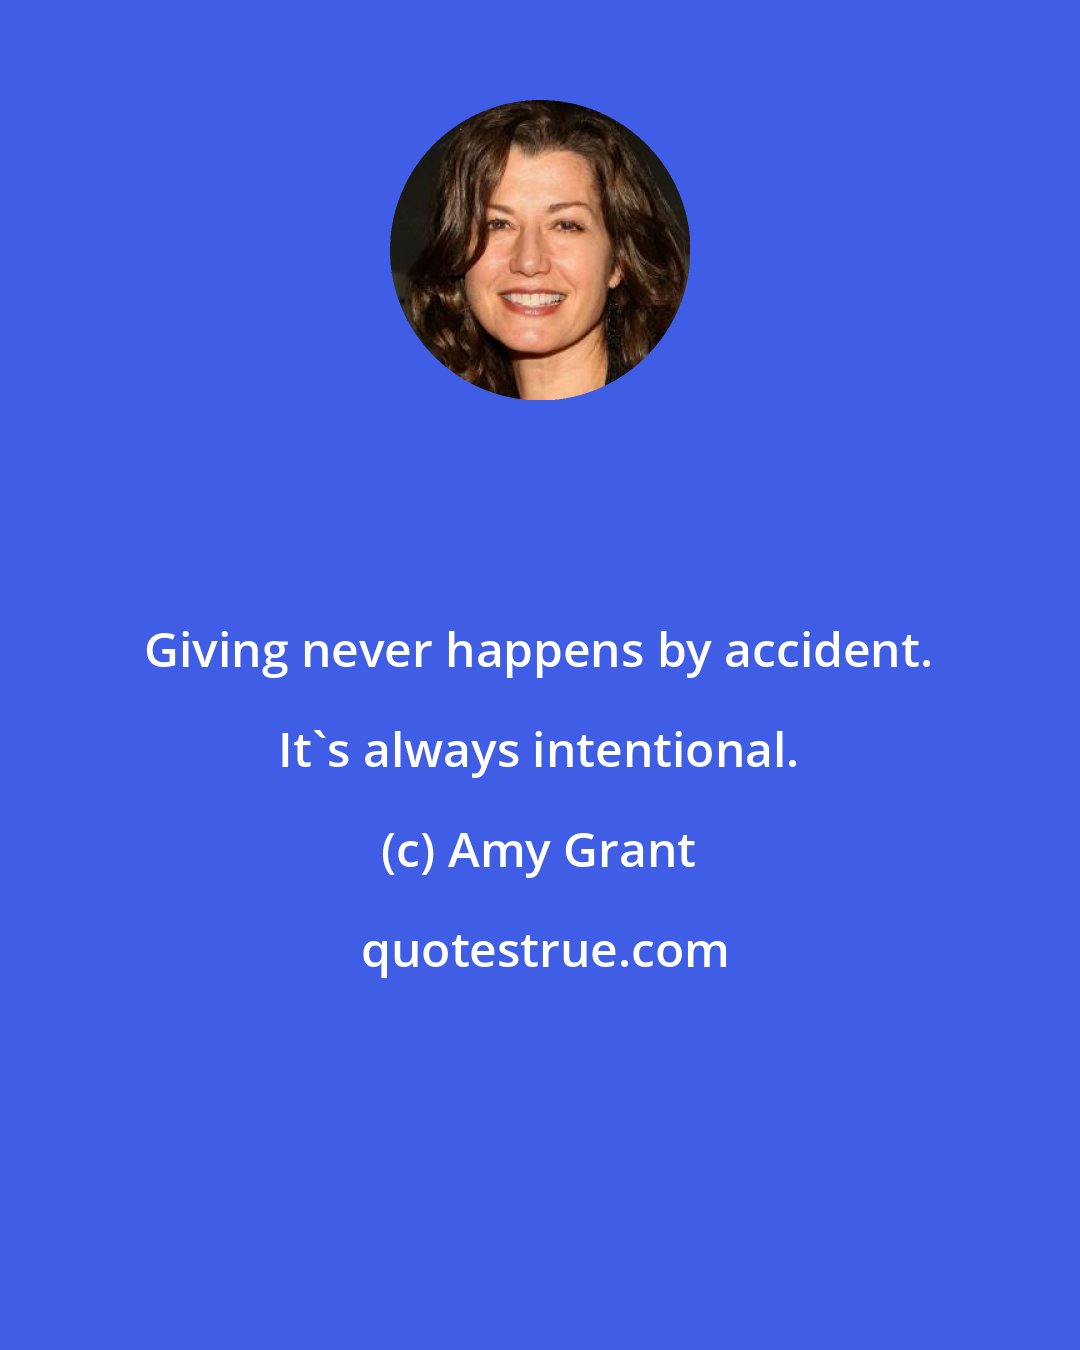 Amy Grant: Giving never happens by accident. It's always intentional.